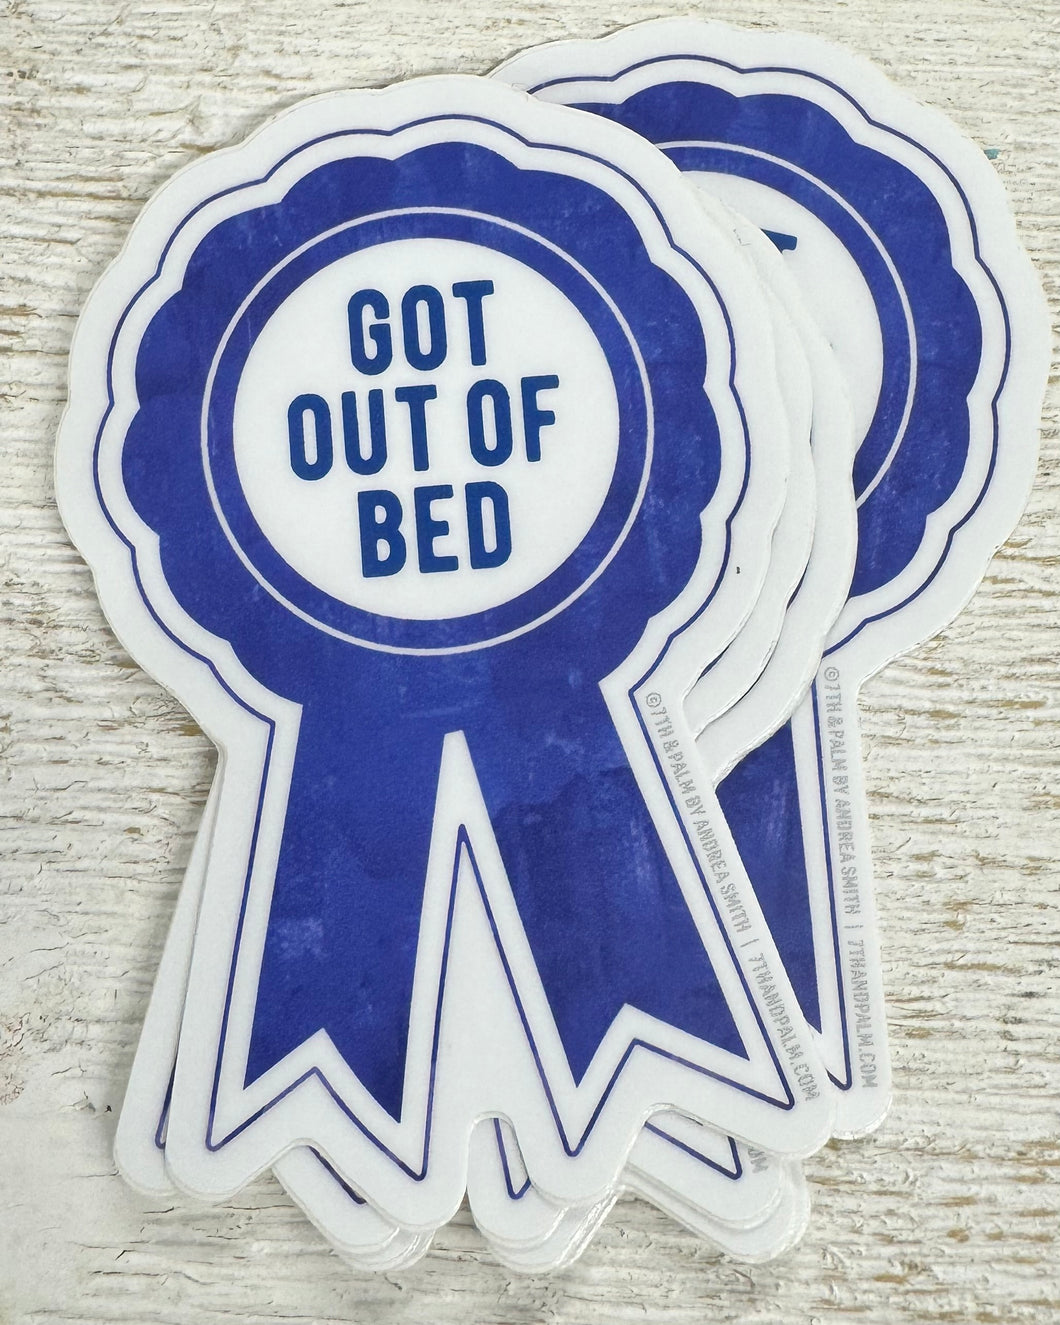 Got out of bed decal